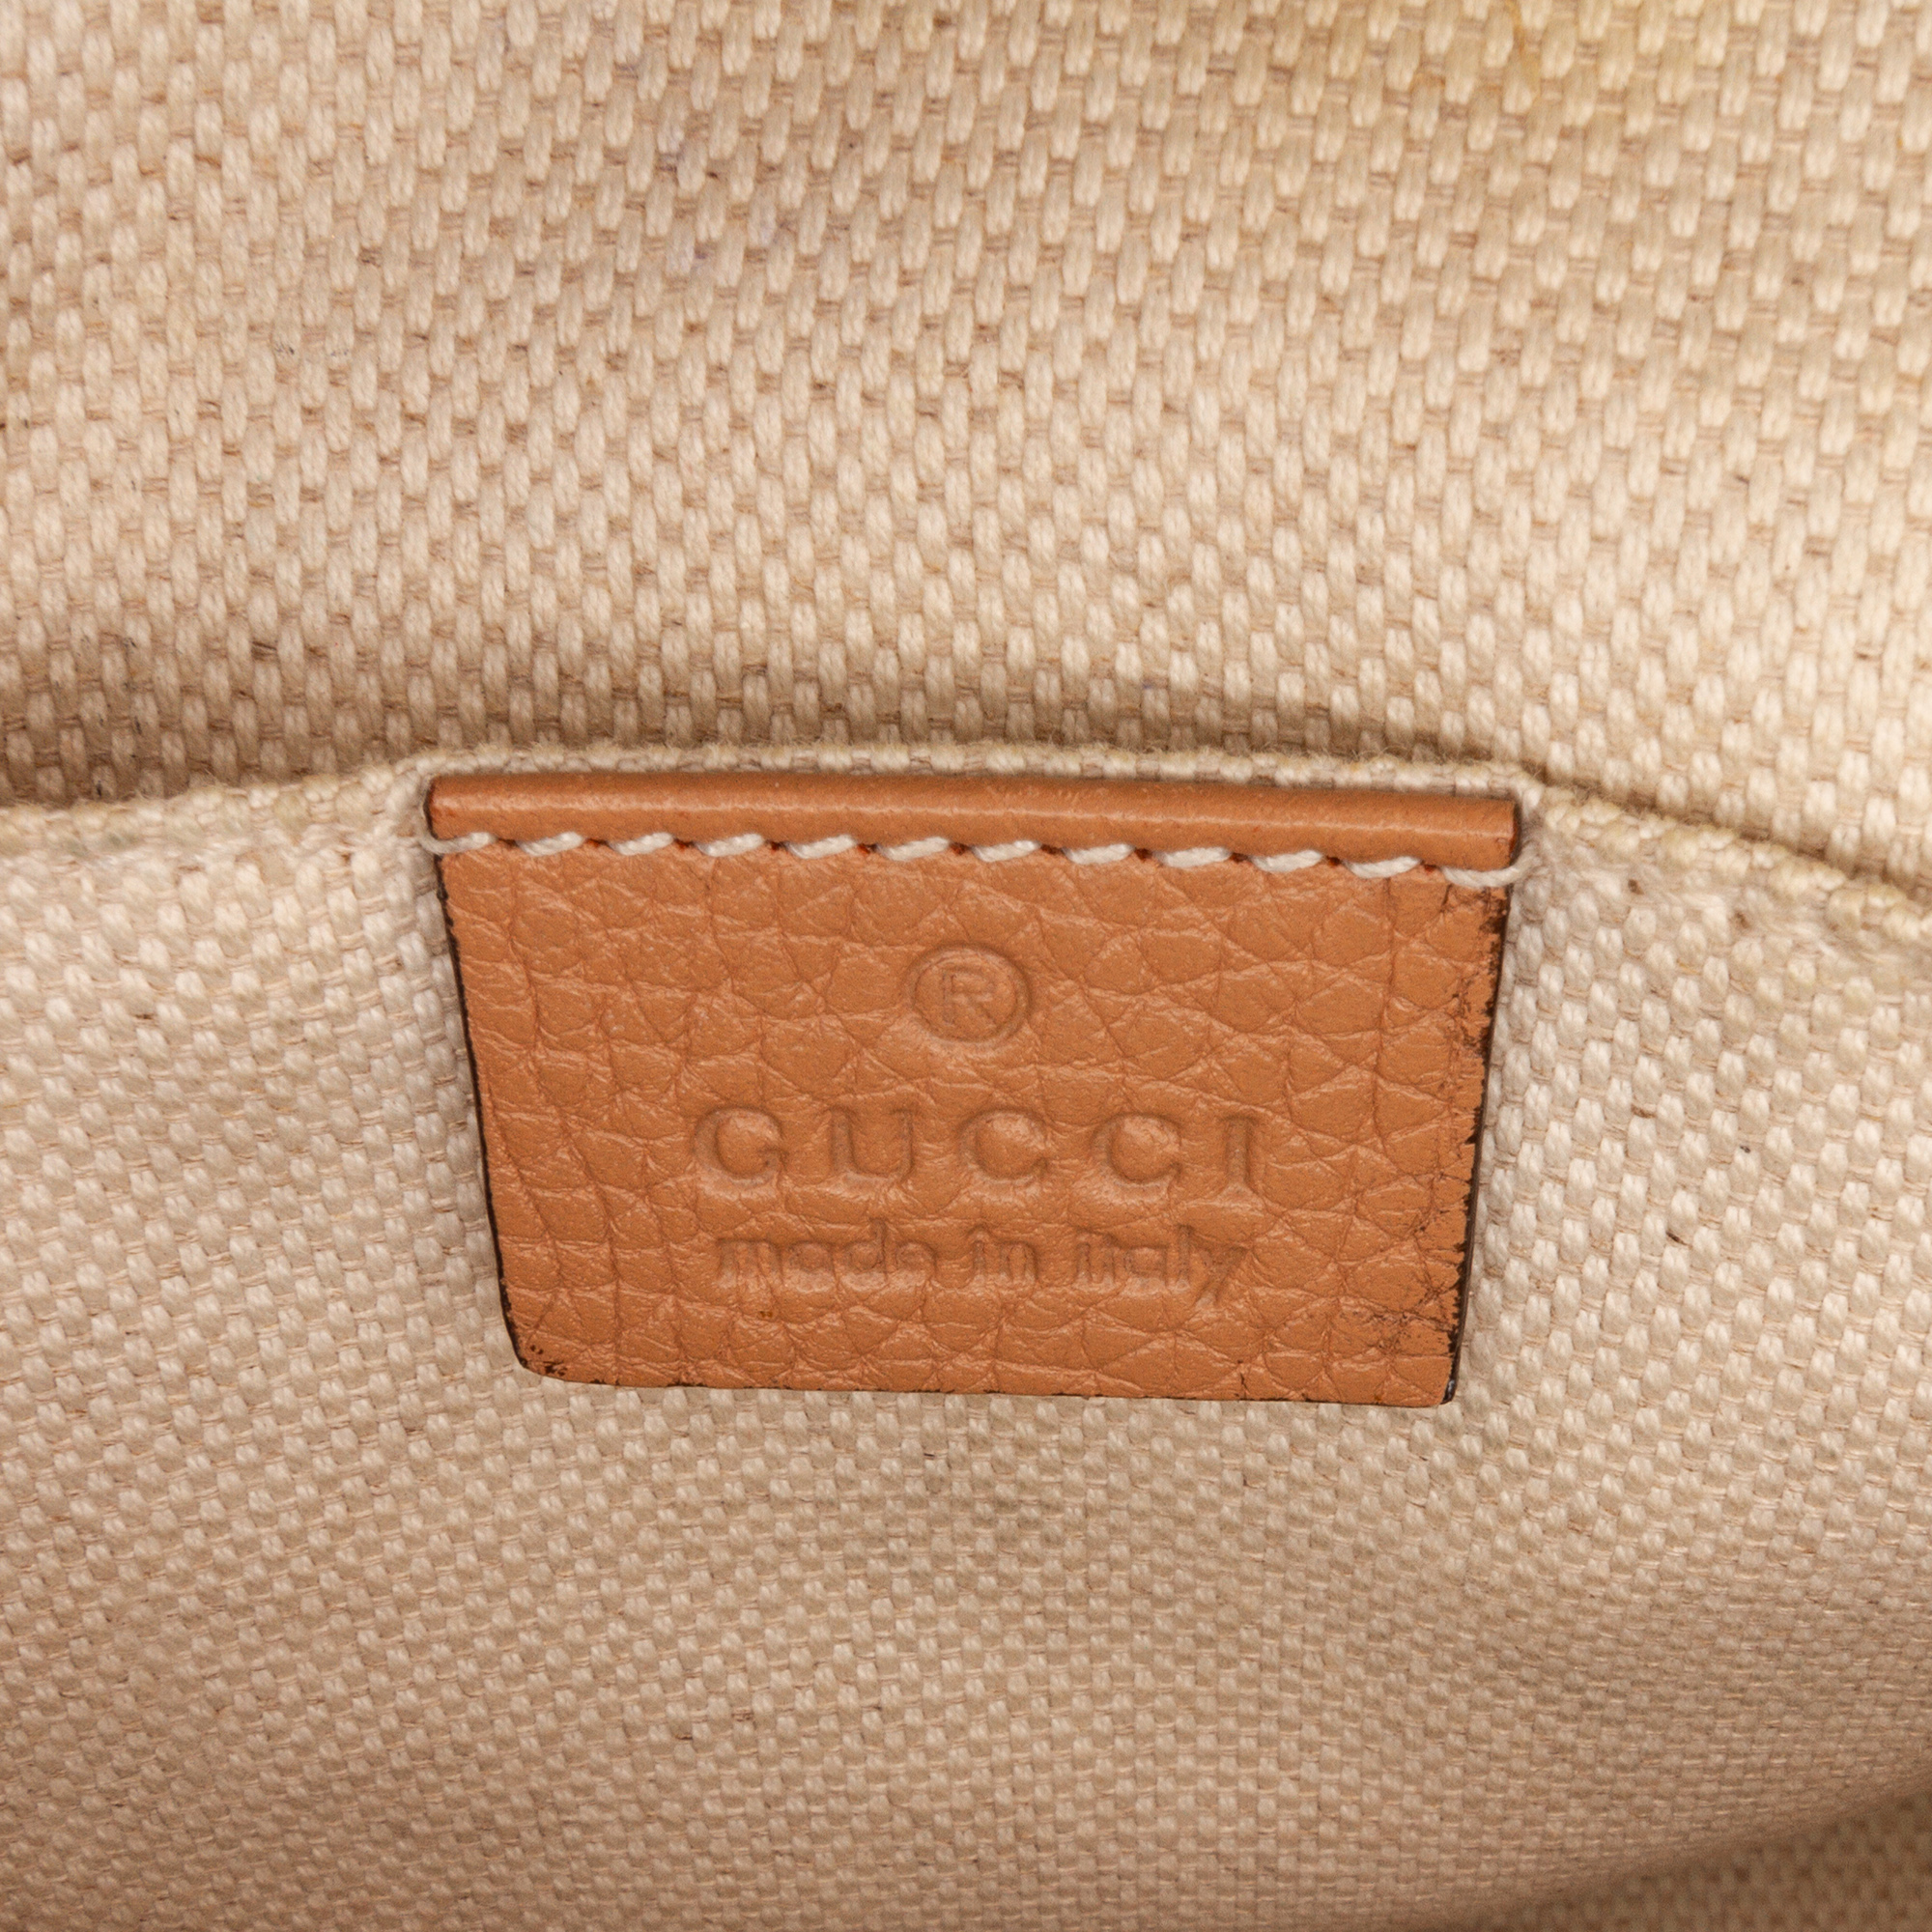 Gucci Brown Leather Soho Disco